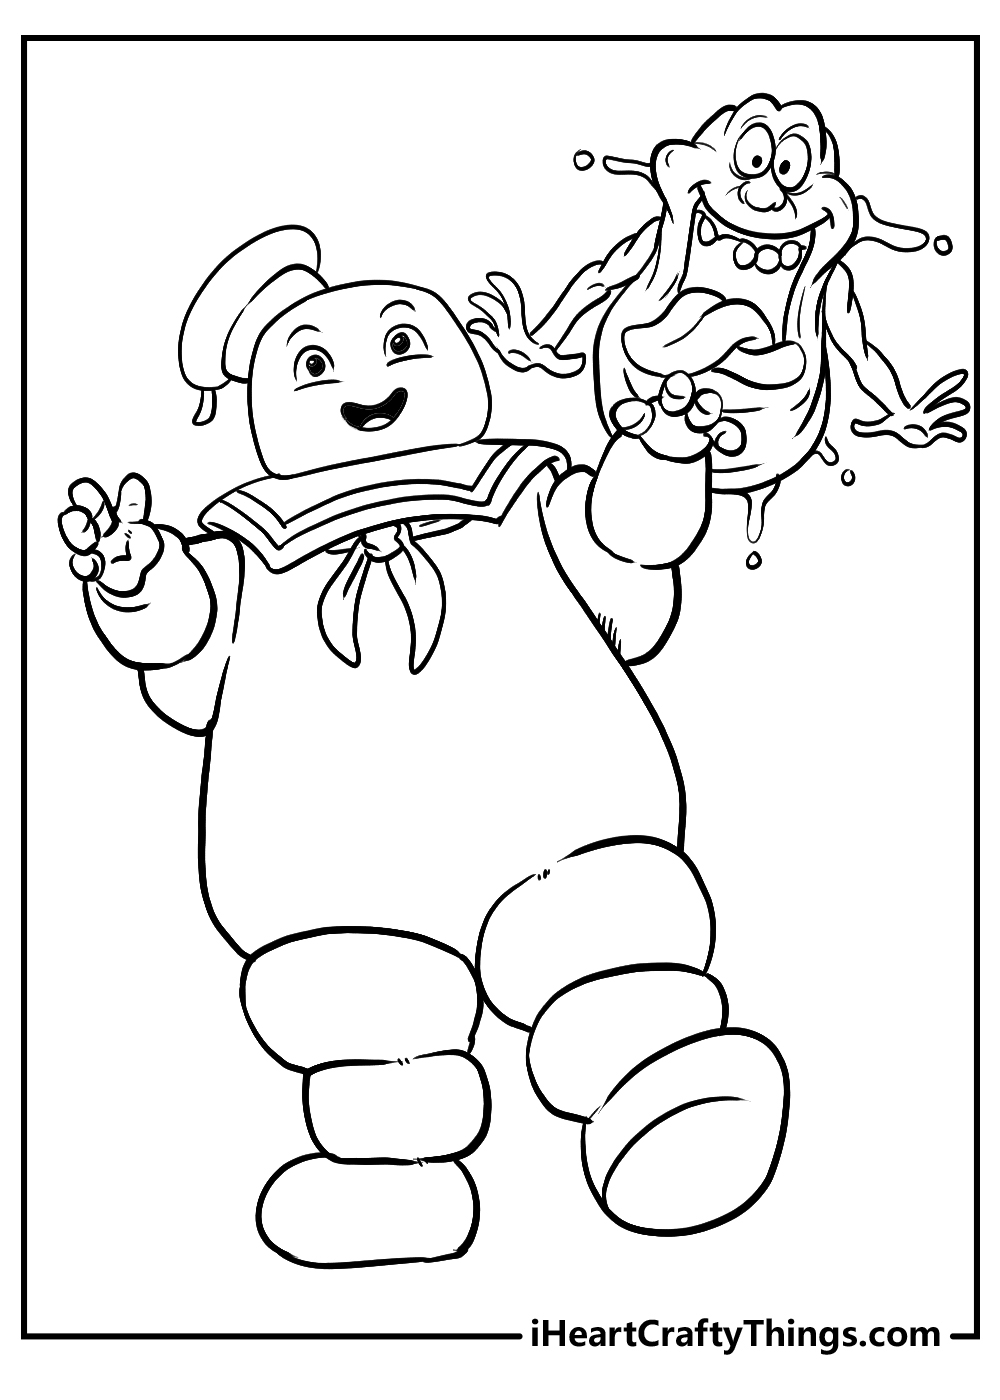 Printable ghostbusters coloring pages updated